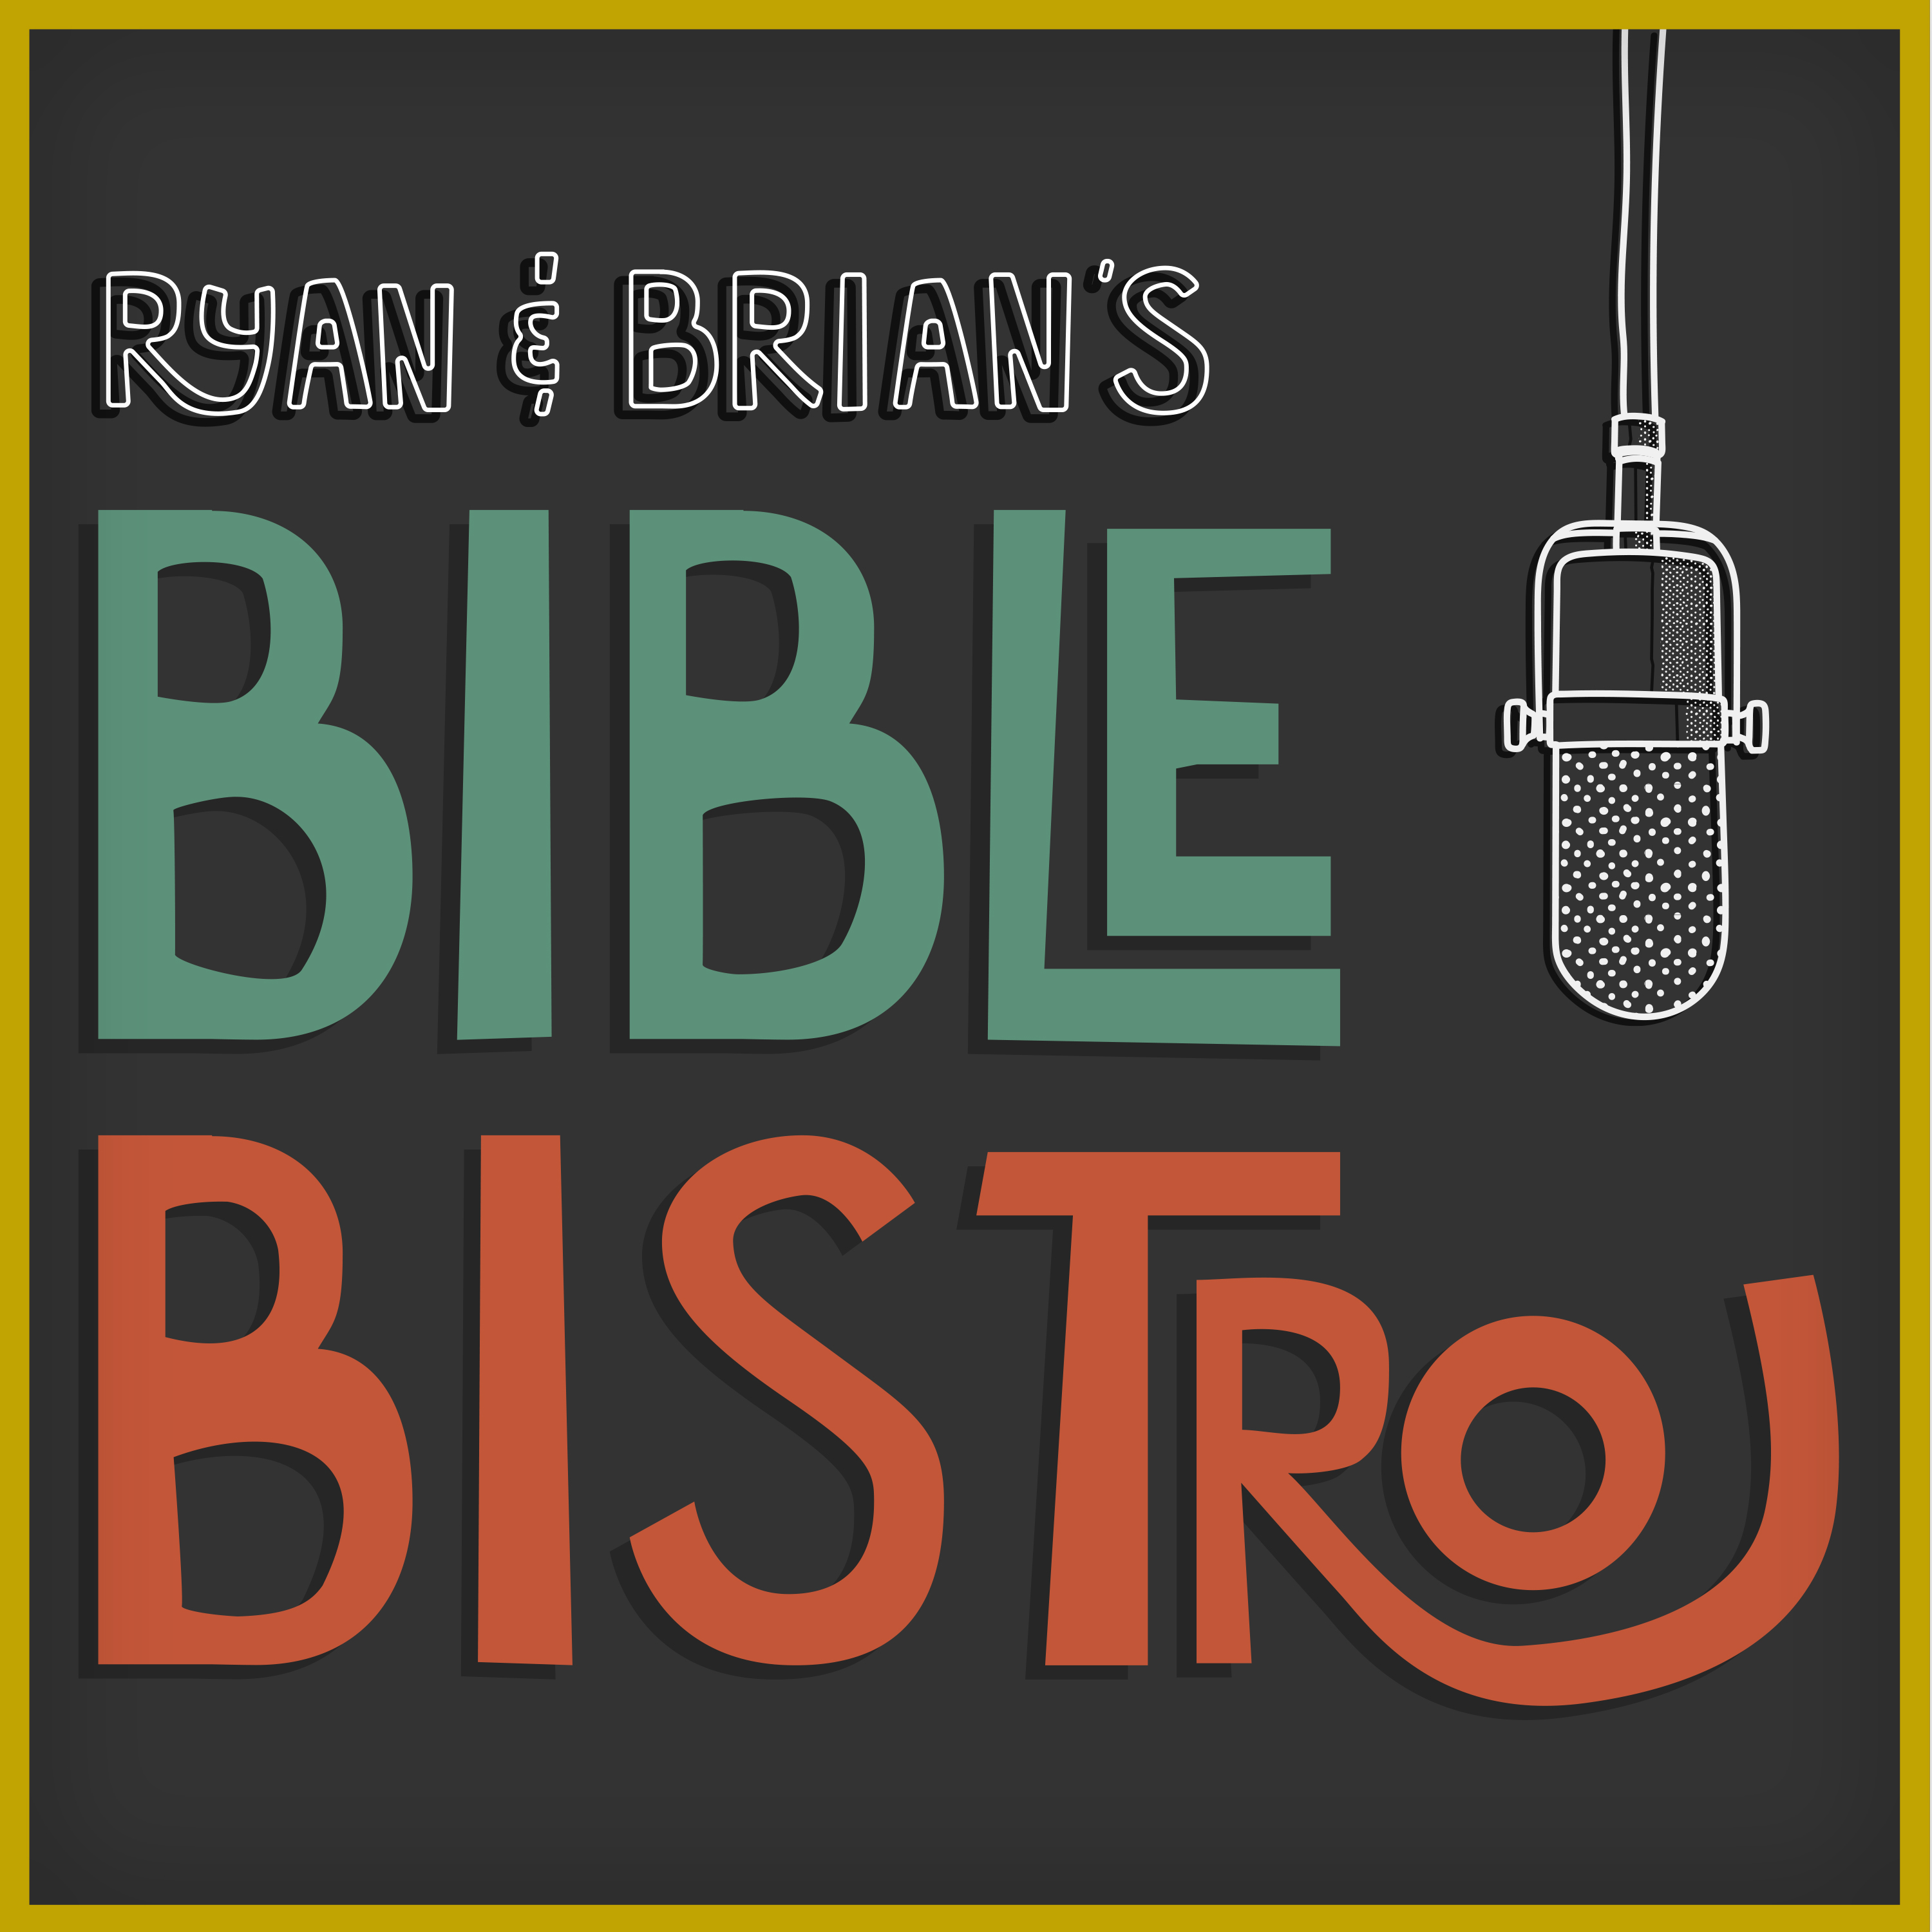 Show artwork for Ryan and Brian's Bible Bistro